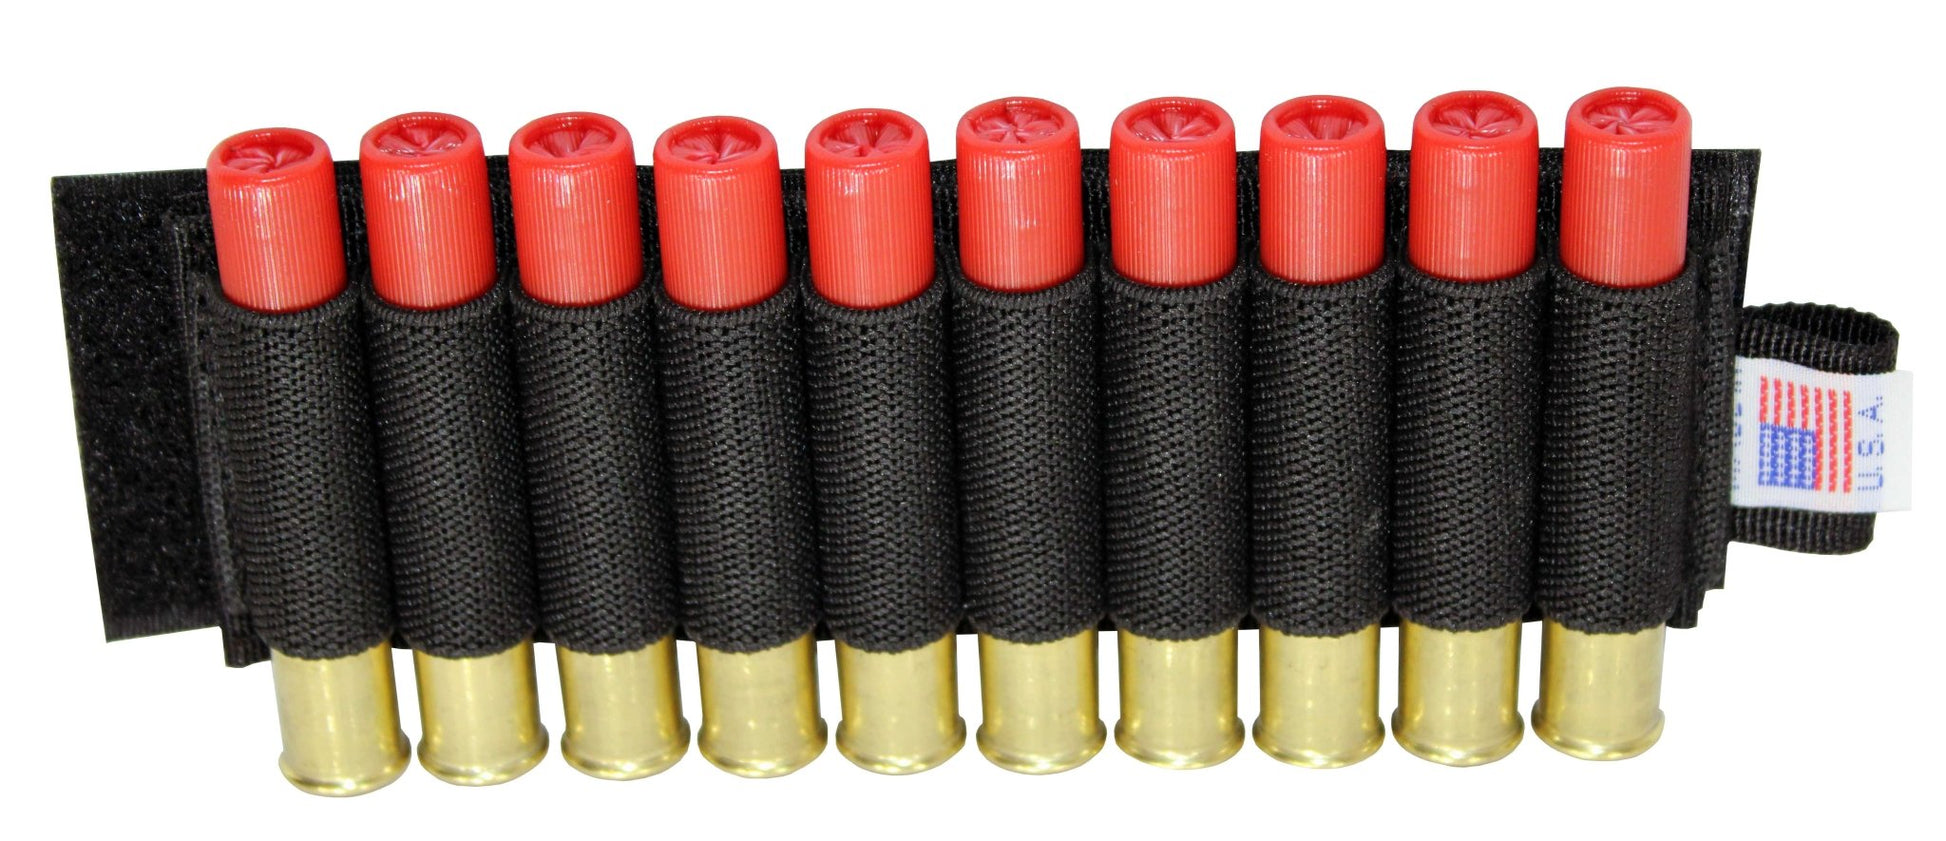 Trinity Shell Carrier Ammo Pouch Compatible with Mossberg 505 .410 bore. - TRINITY SUPPLY INC